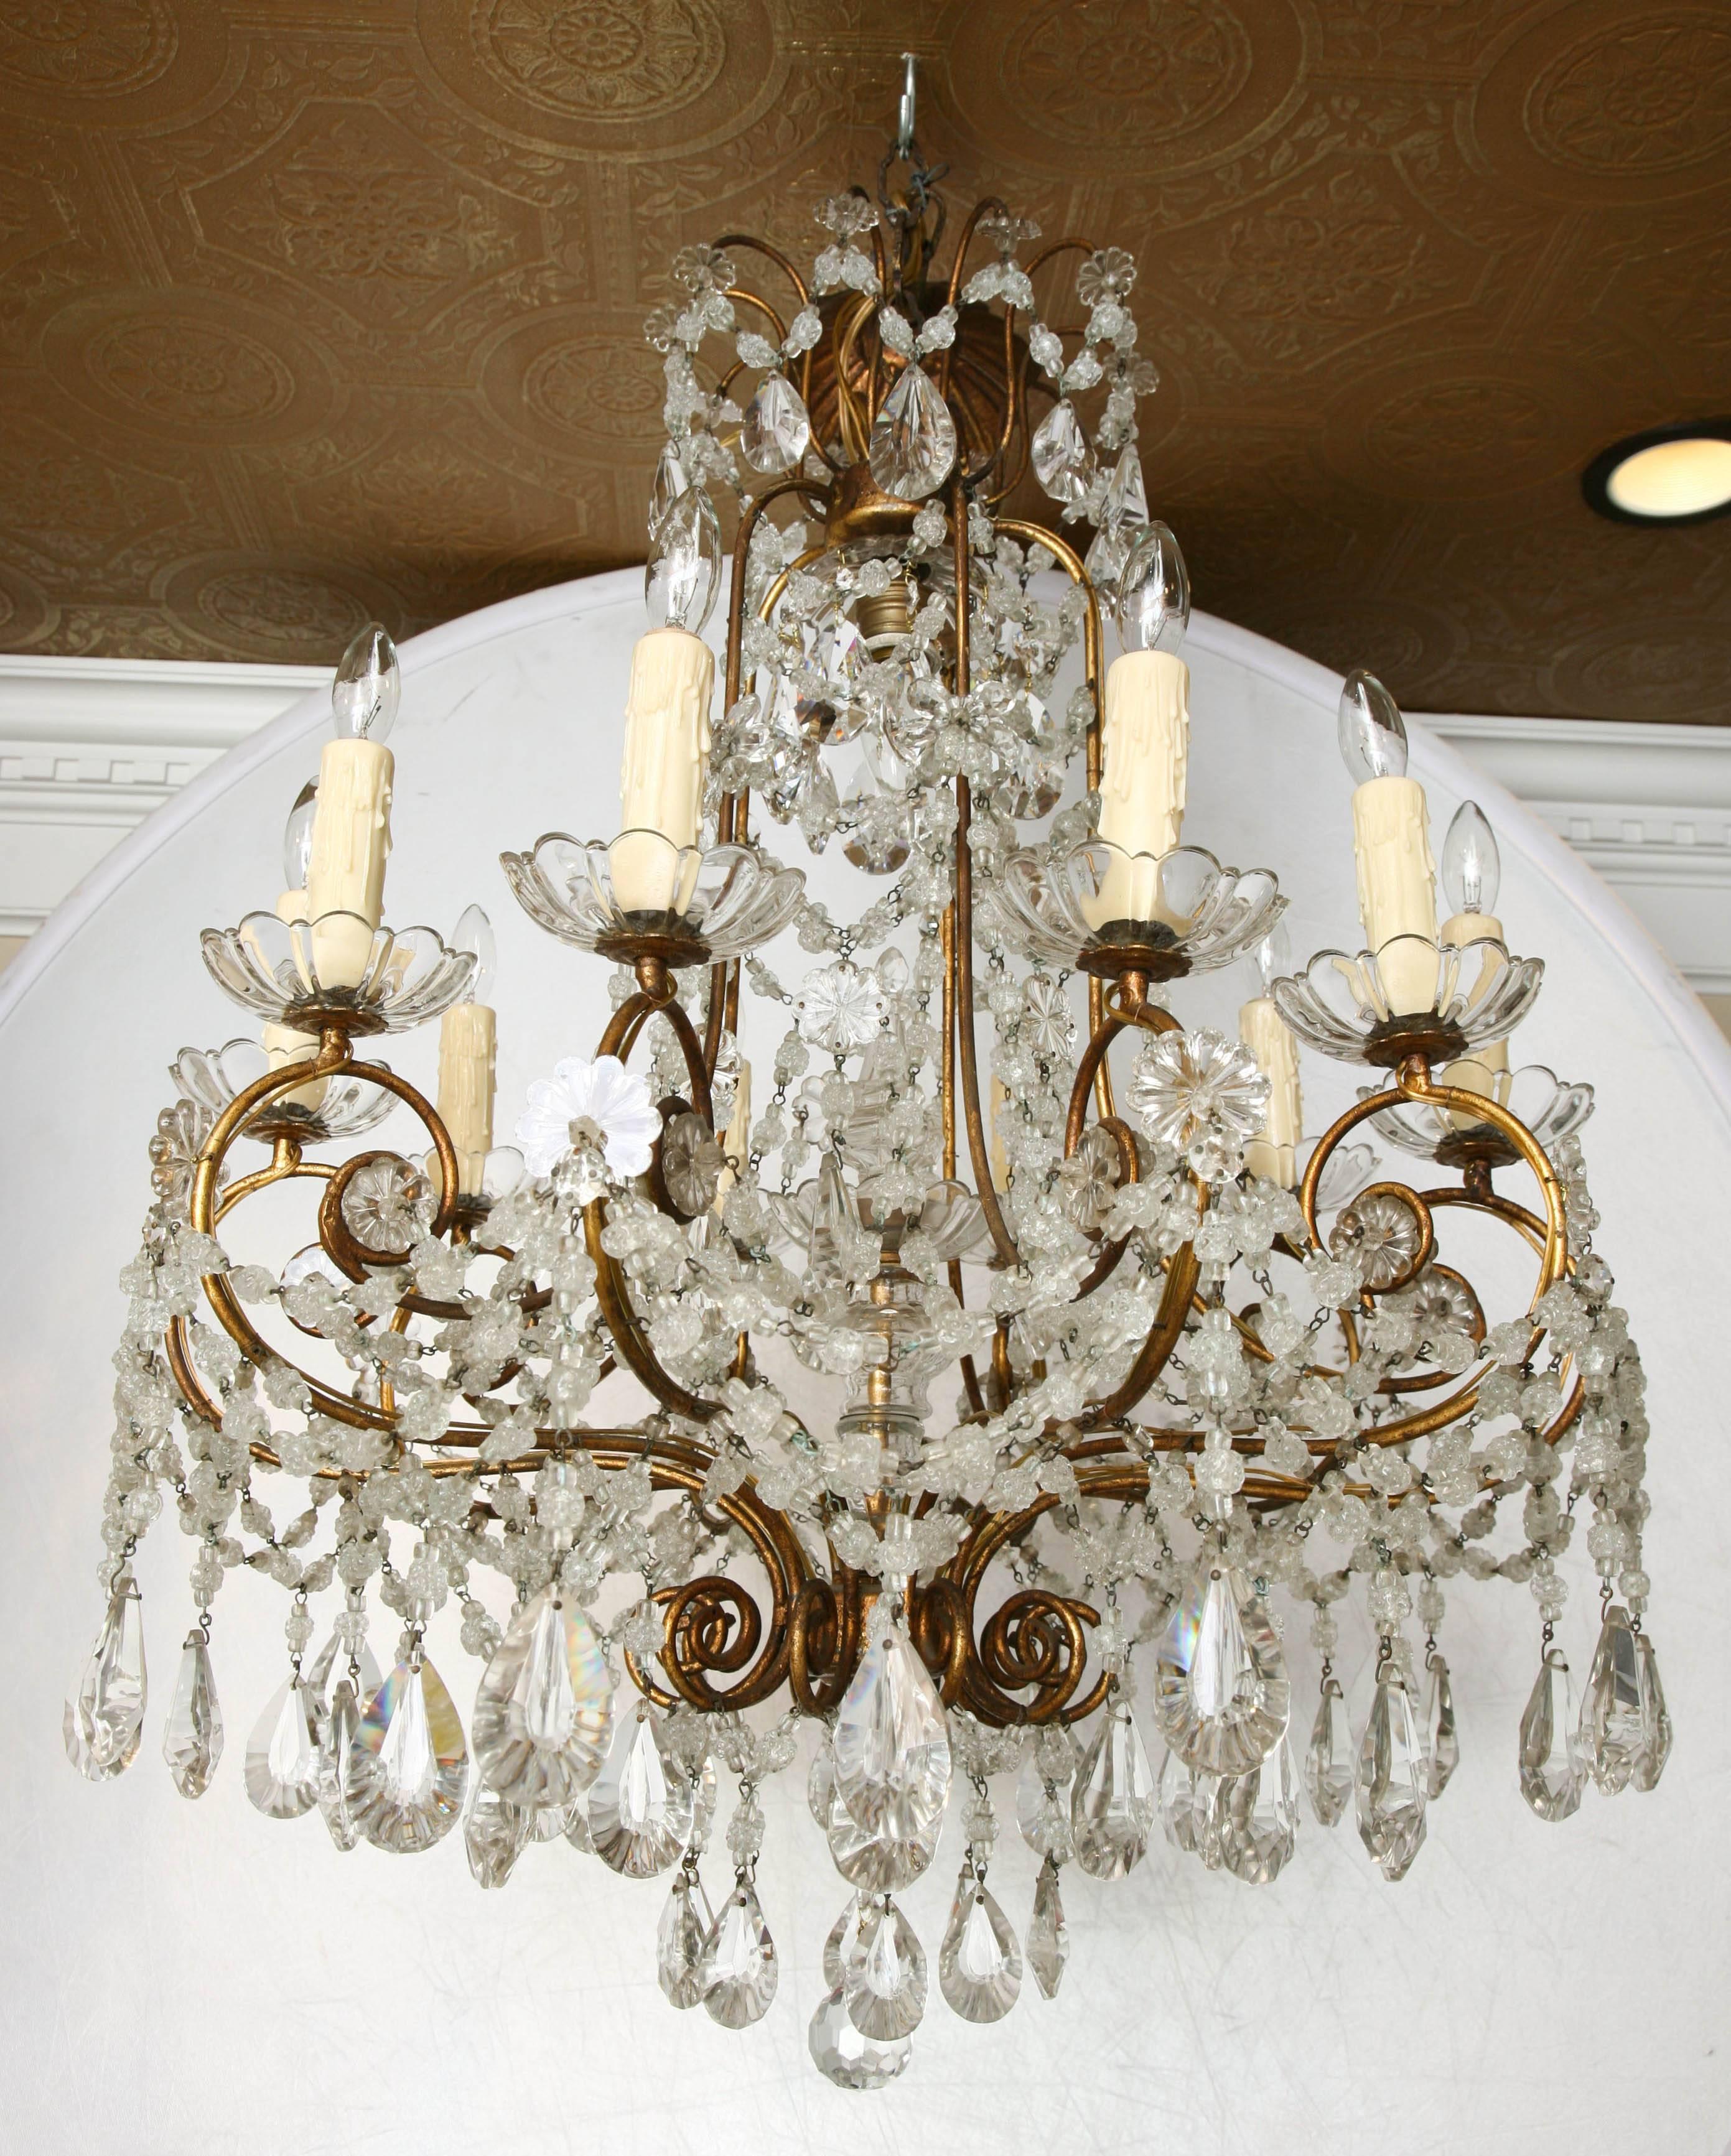 Spectacular chandelier, having a cage-form frame of gilded iron, a handblown knopped glass spire sets inside the center, suspending ten S-scroll candle arms, each holding a scalloped bobeche and candle; surmounted by five upturned arms joining its